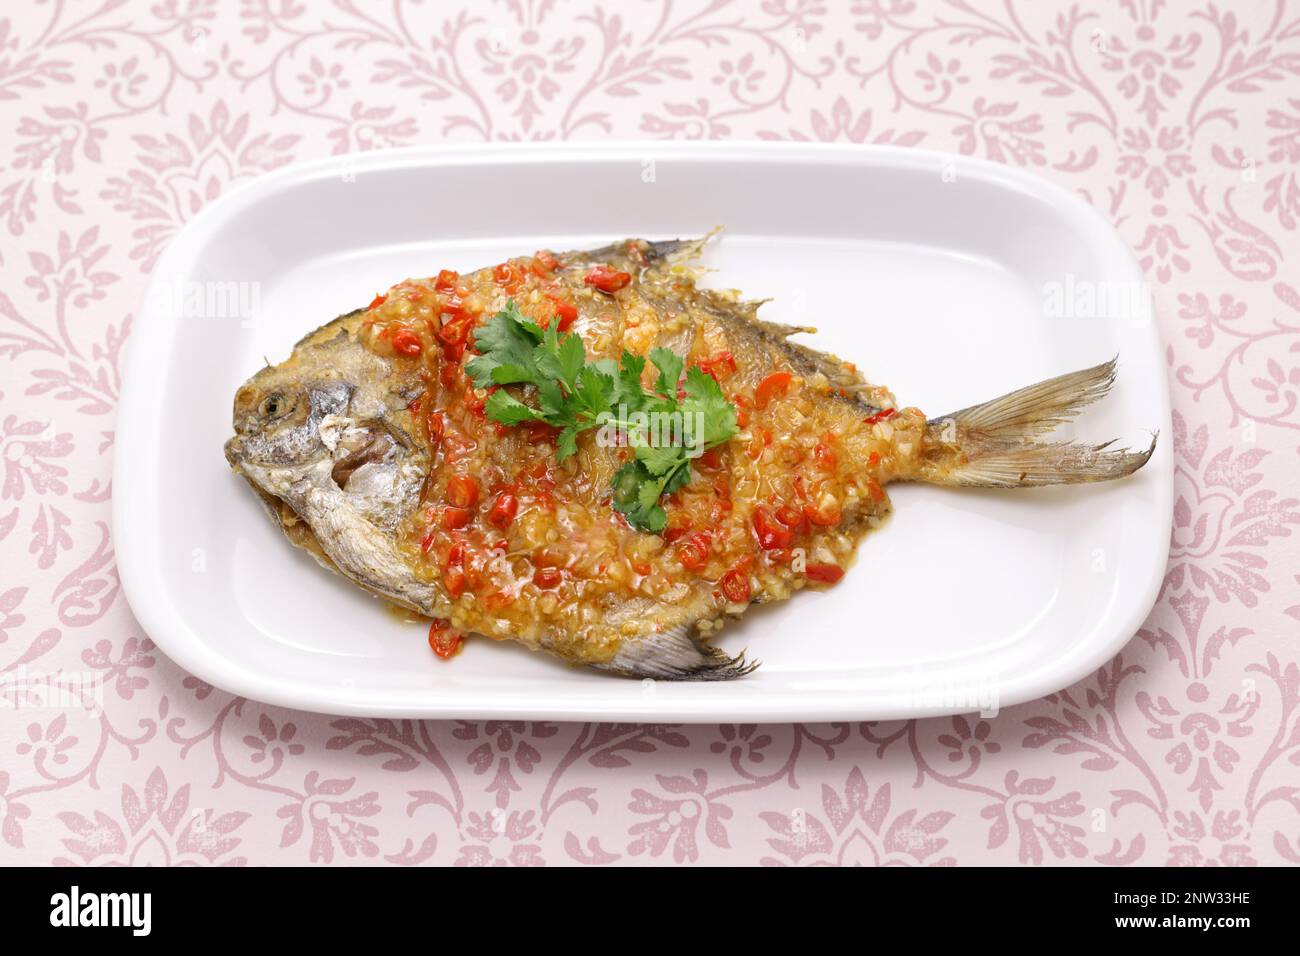 fried pomfret fish with chili sauce, Thai cuisine Stock Photo